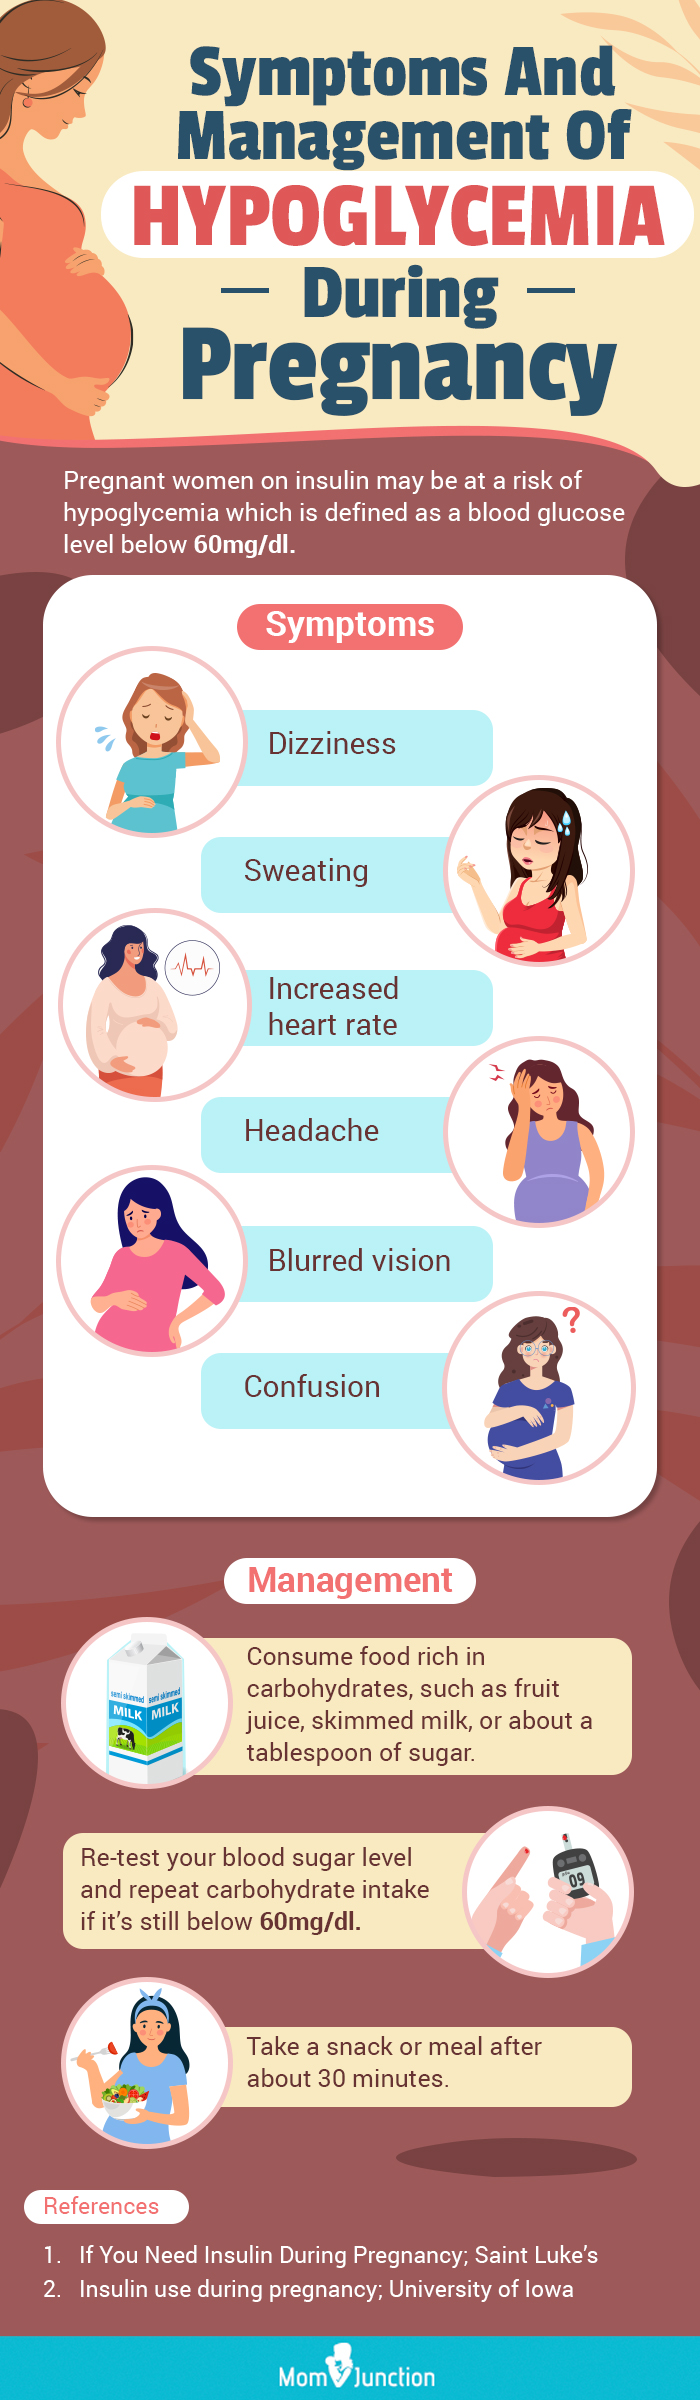 symptoms and management of hypoglycemia during pregnancy (infographic)